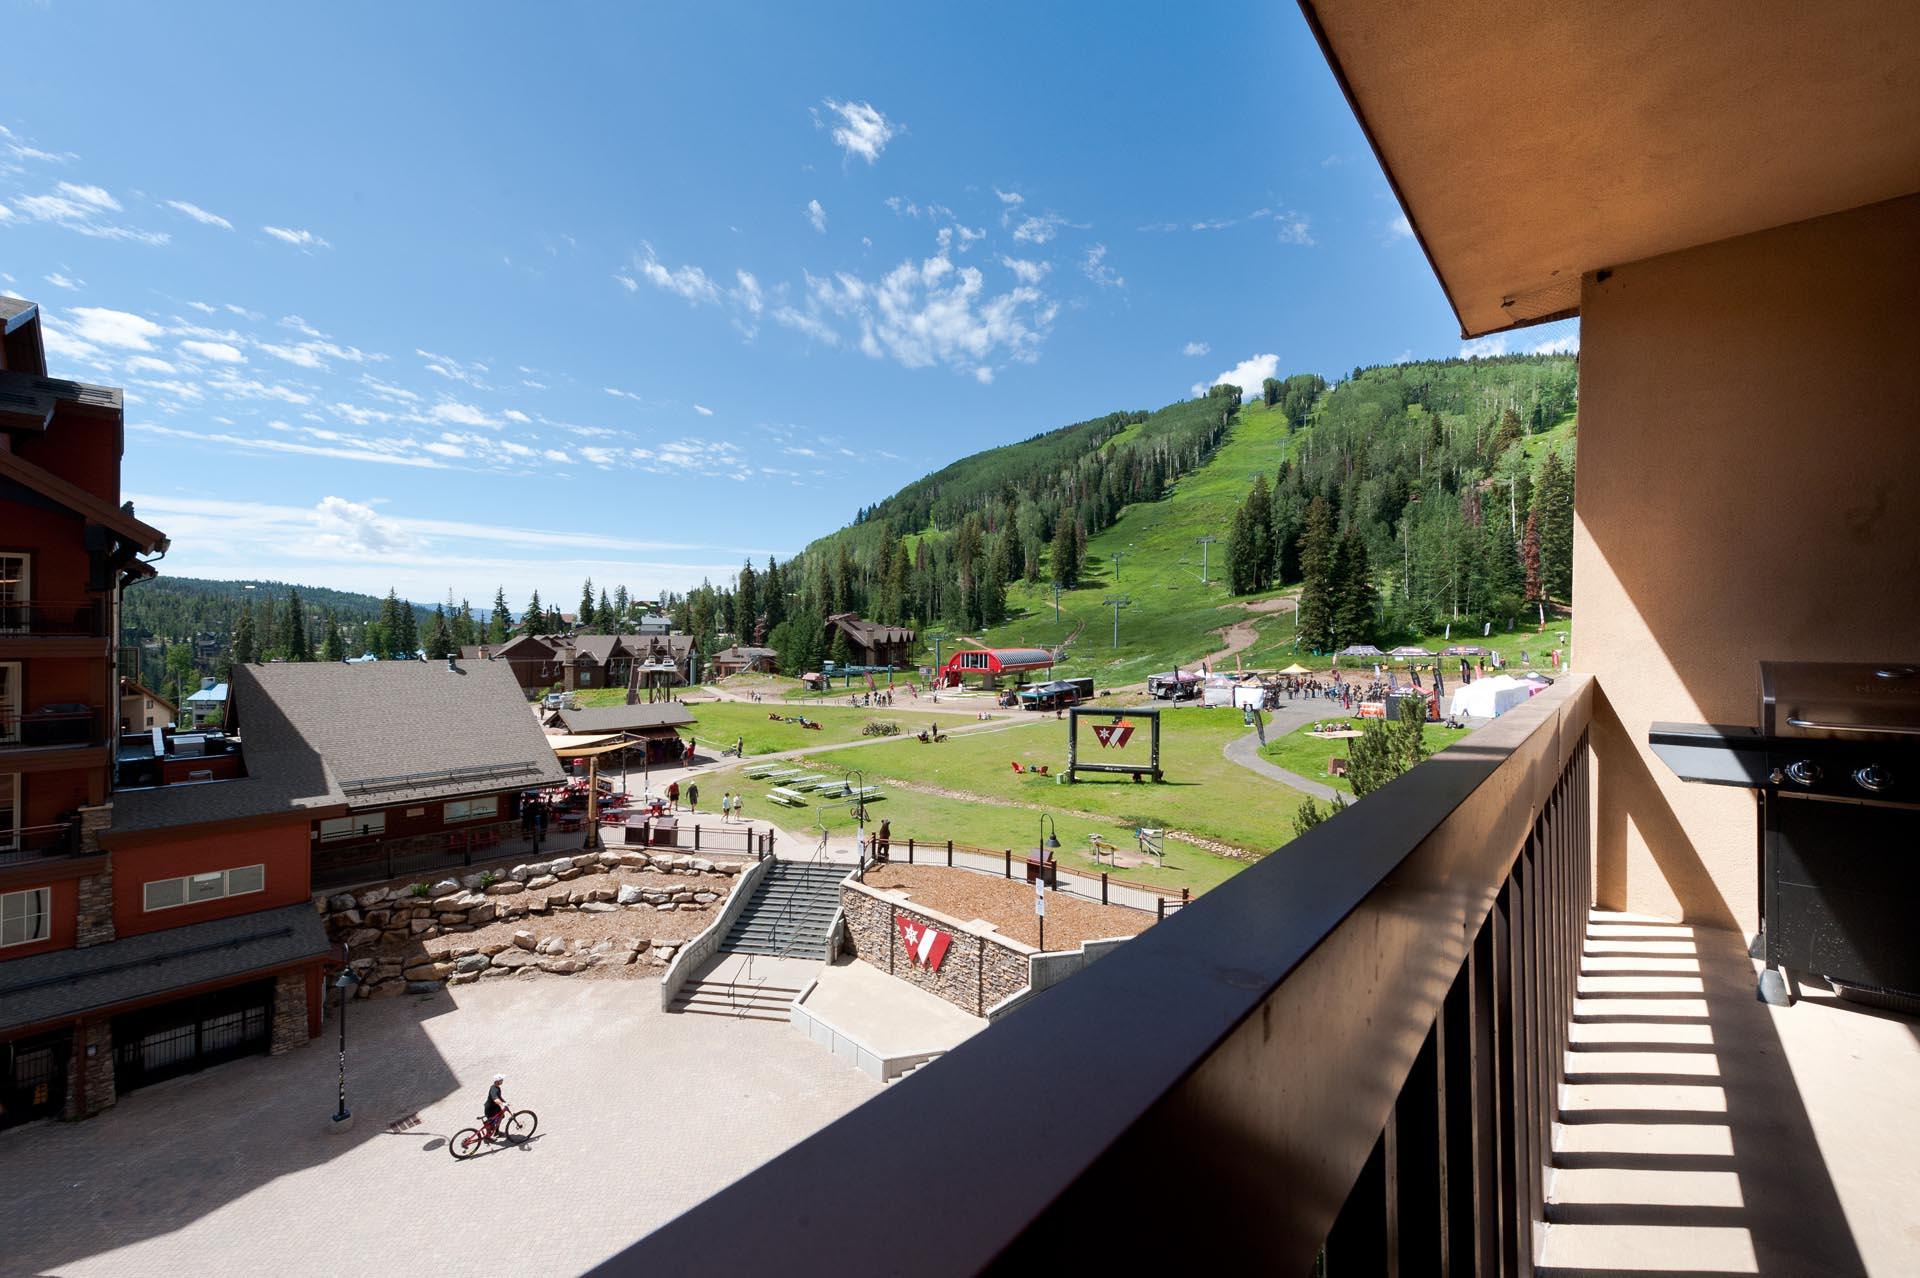 View of the Main Plaza and Ski Base area from the condo deck